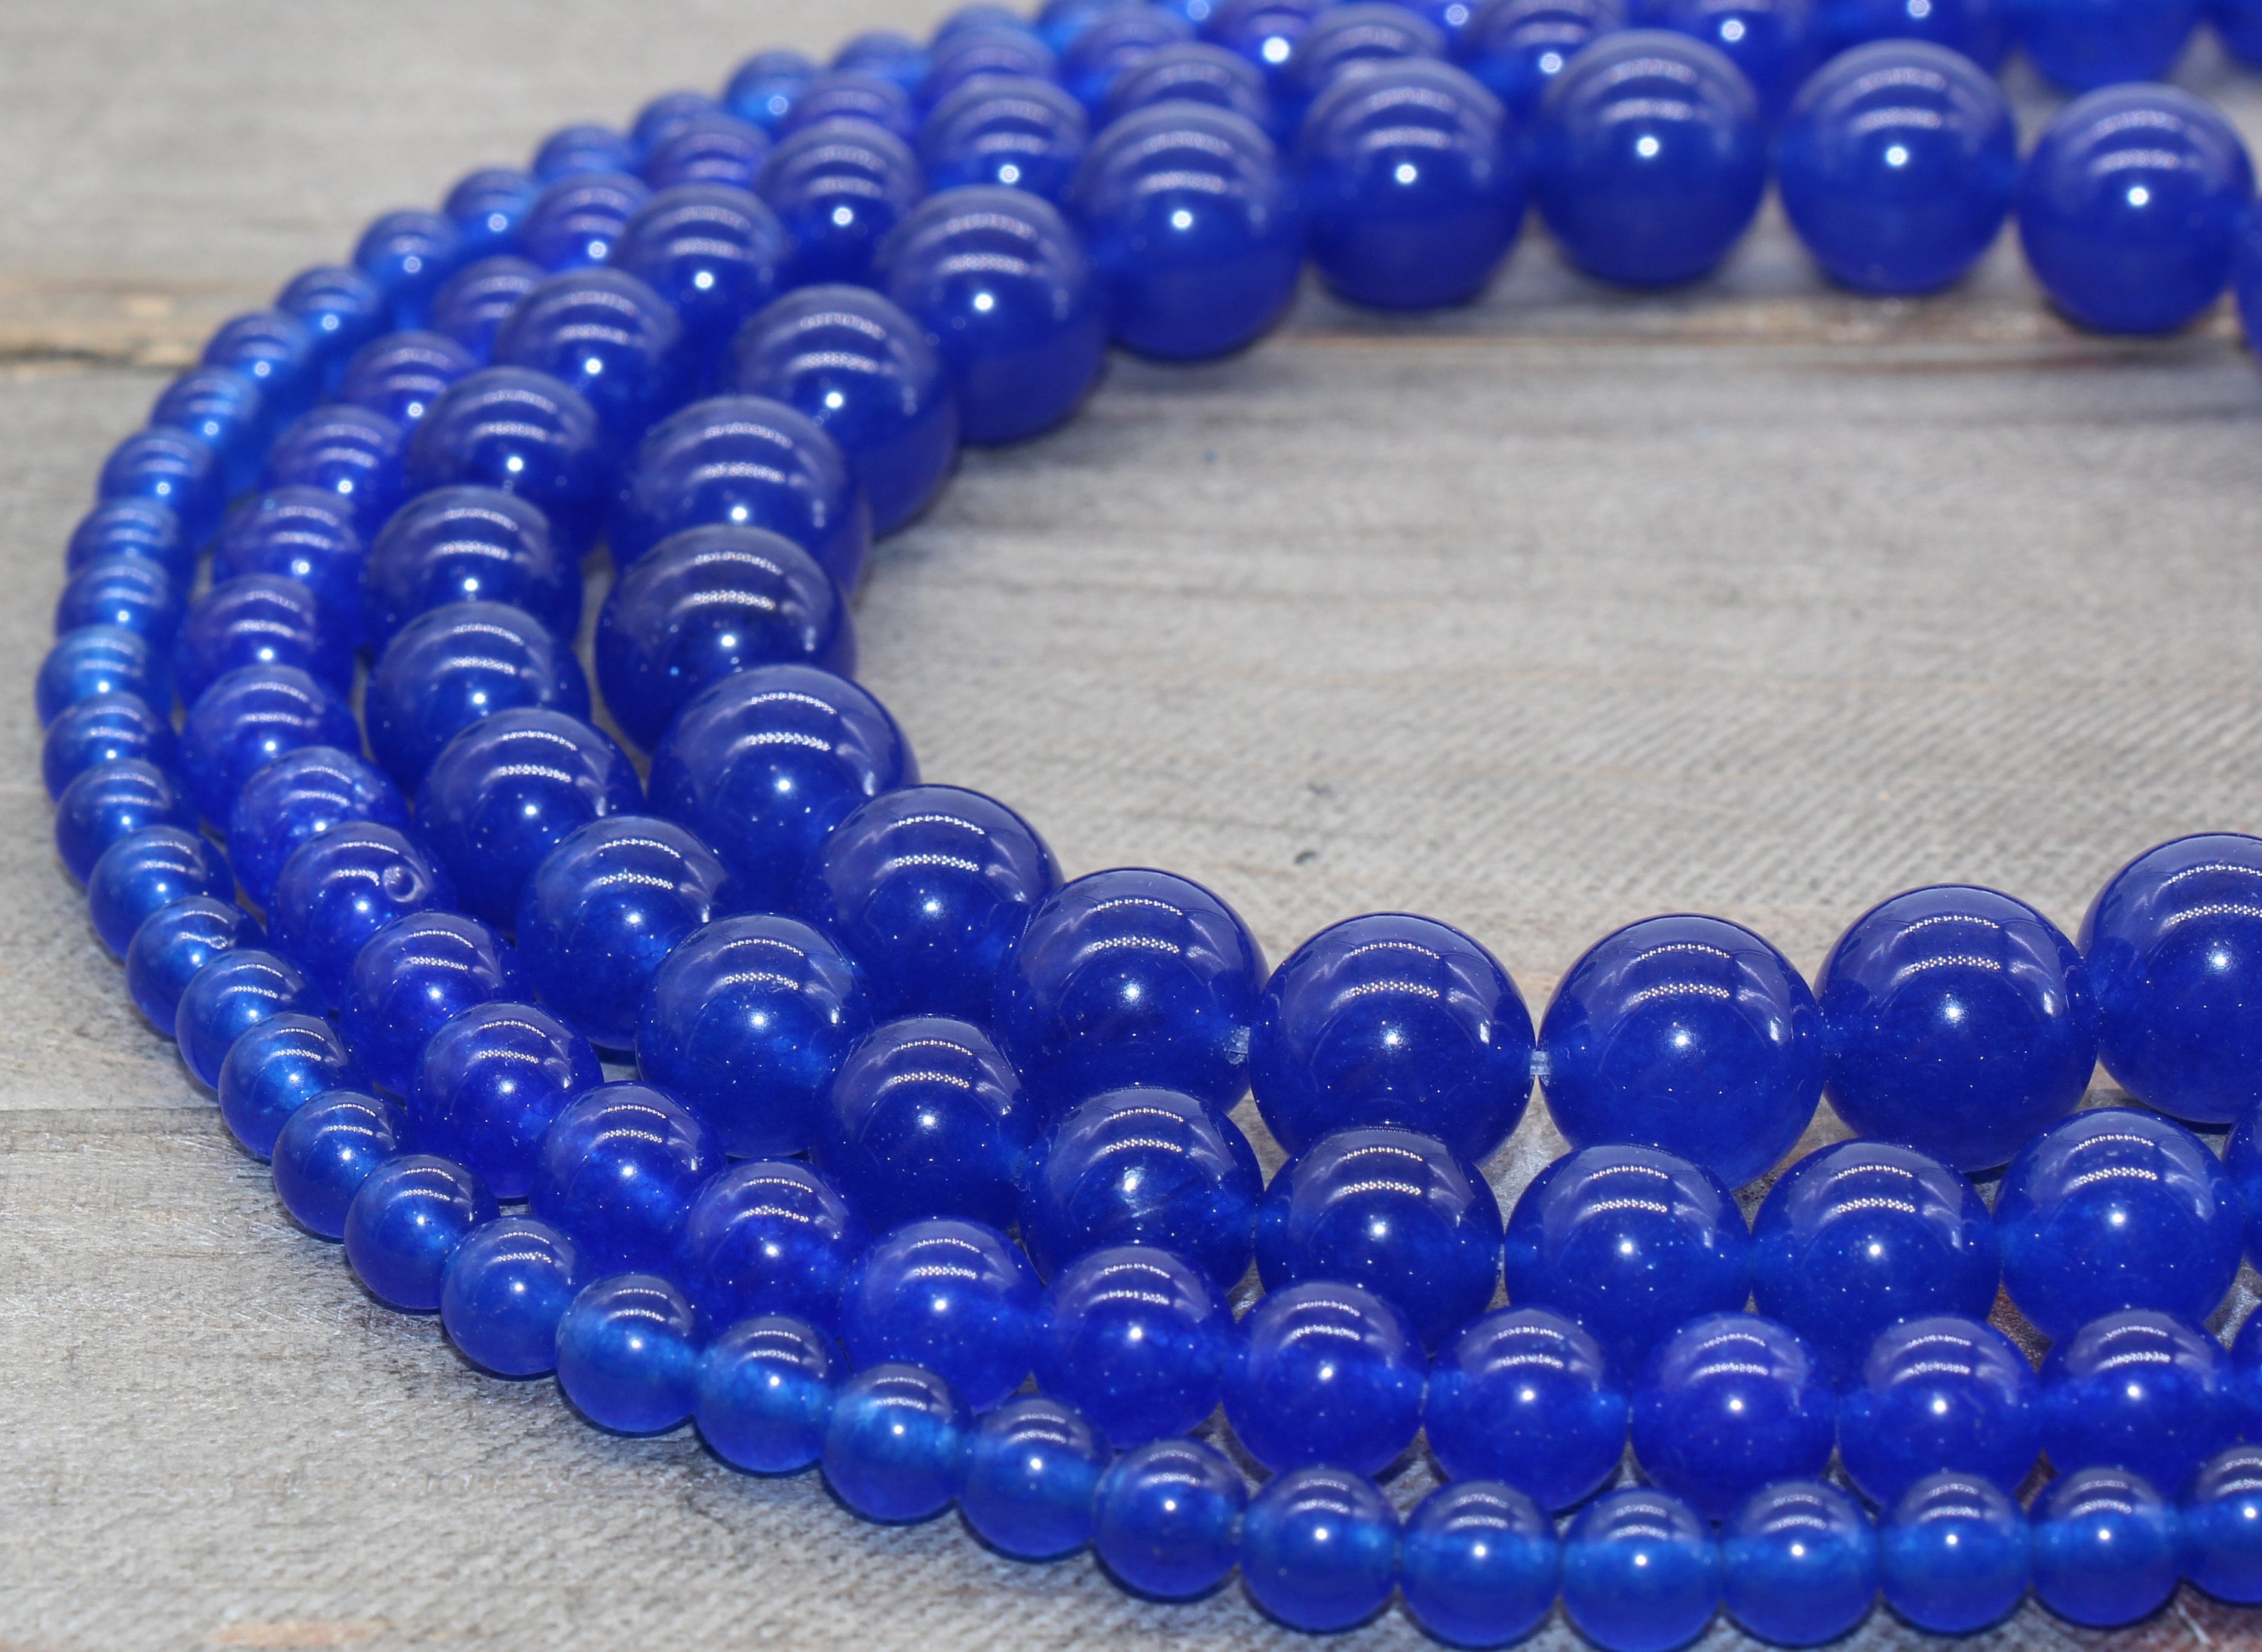 45pcs/set Teardrop Royal Blue Crystal Beads With Faceted Cut Glass Beads,  Spacer Beads, Handmade Cushion Beads For Diy Bracelet, Necklace, Women's  Jewelry Making Accessories